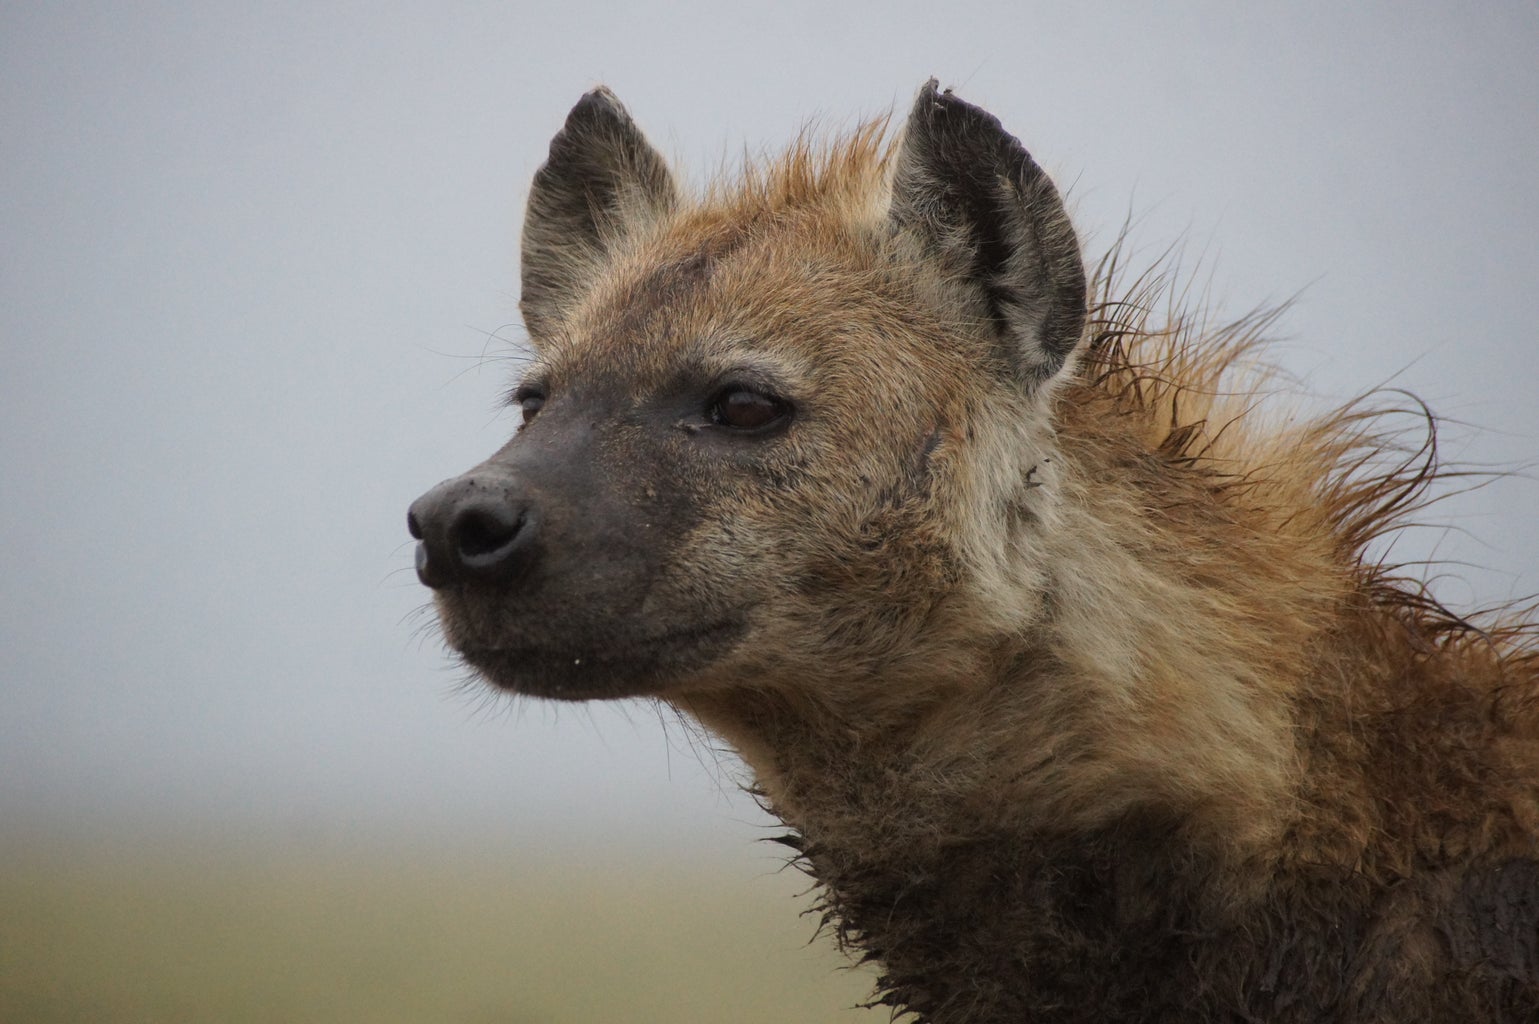 A portrait-style picture of an adult spotted hyena.